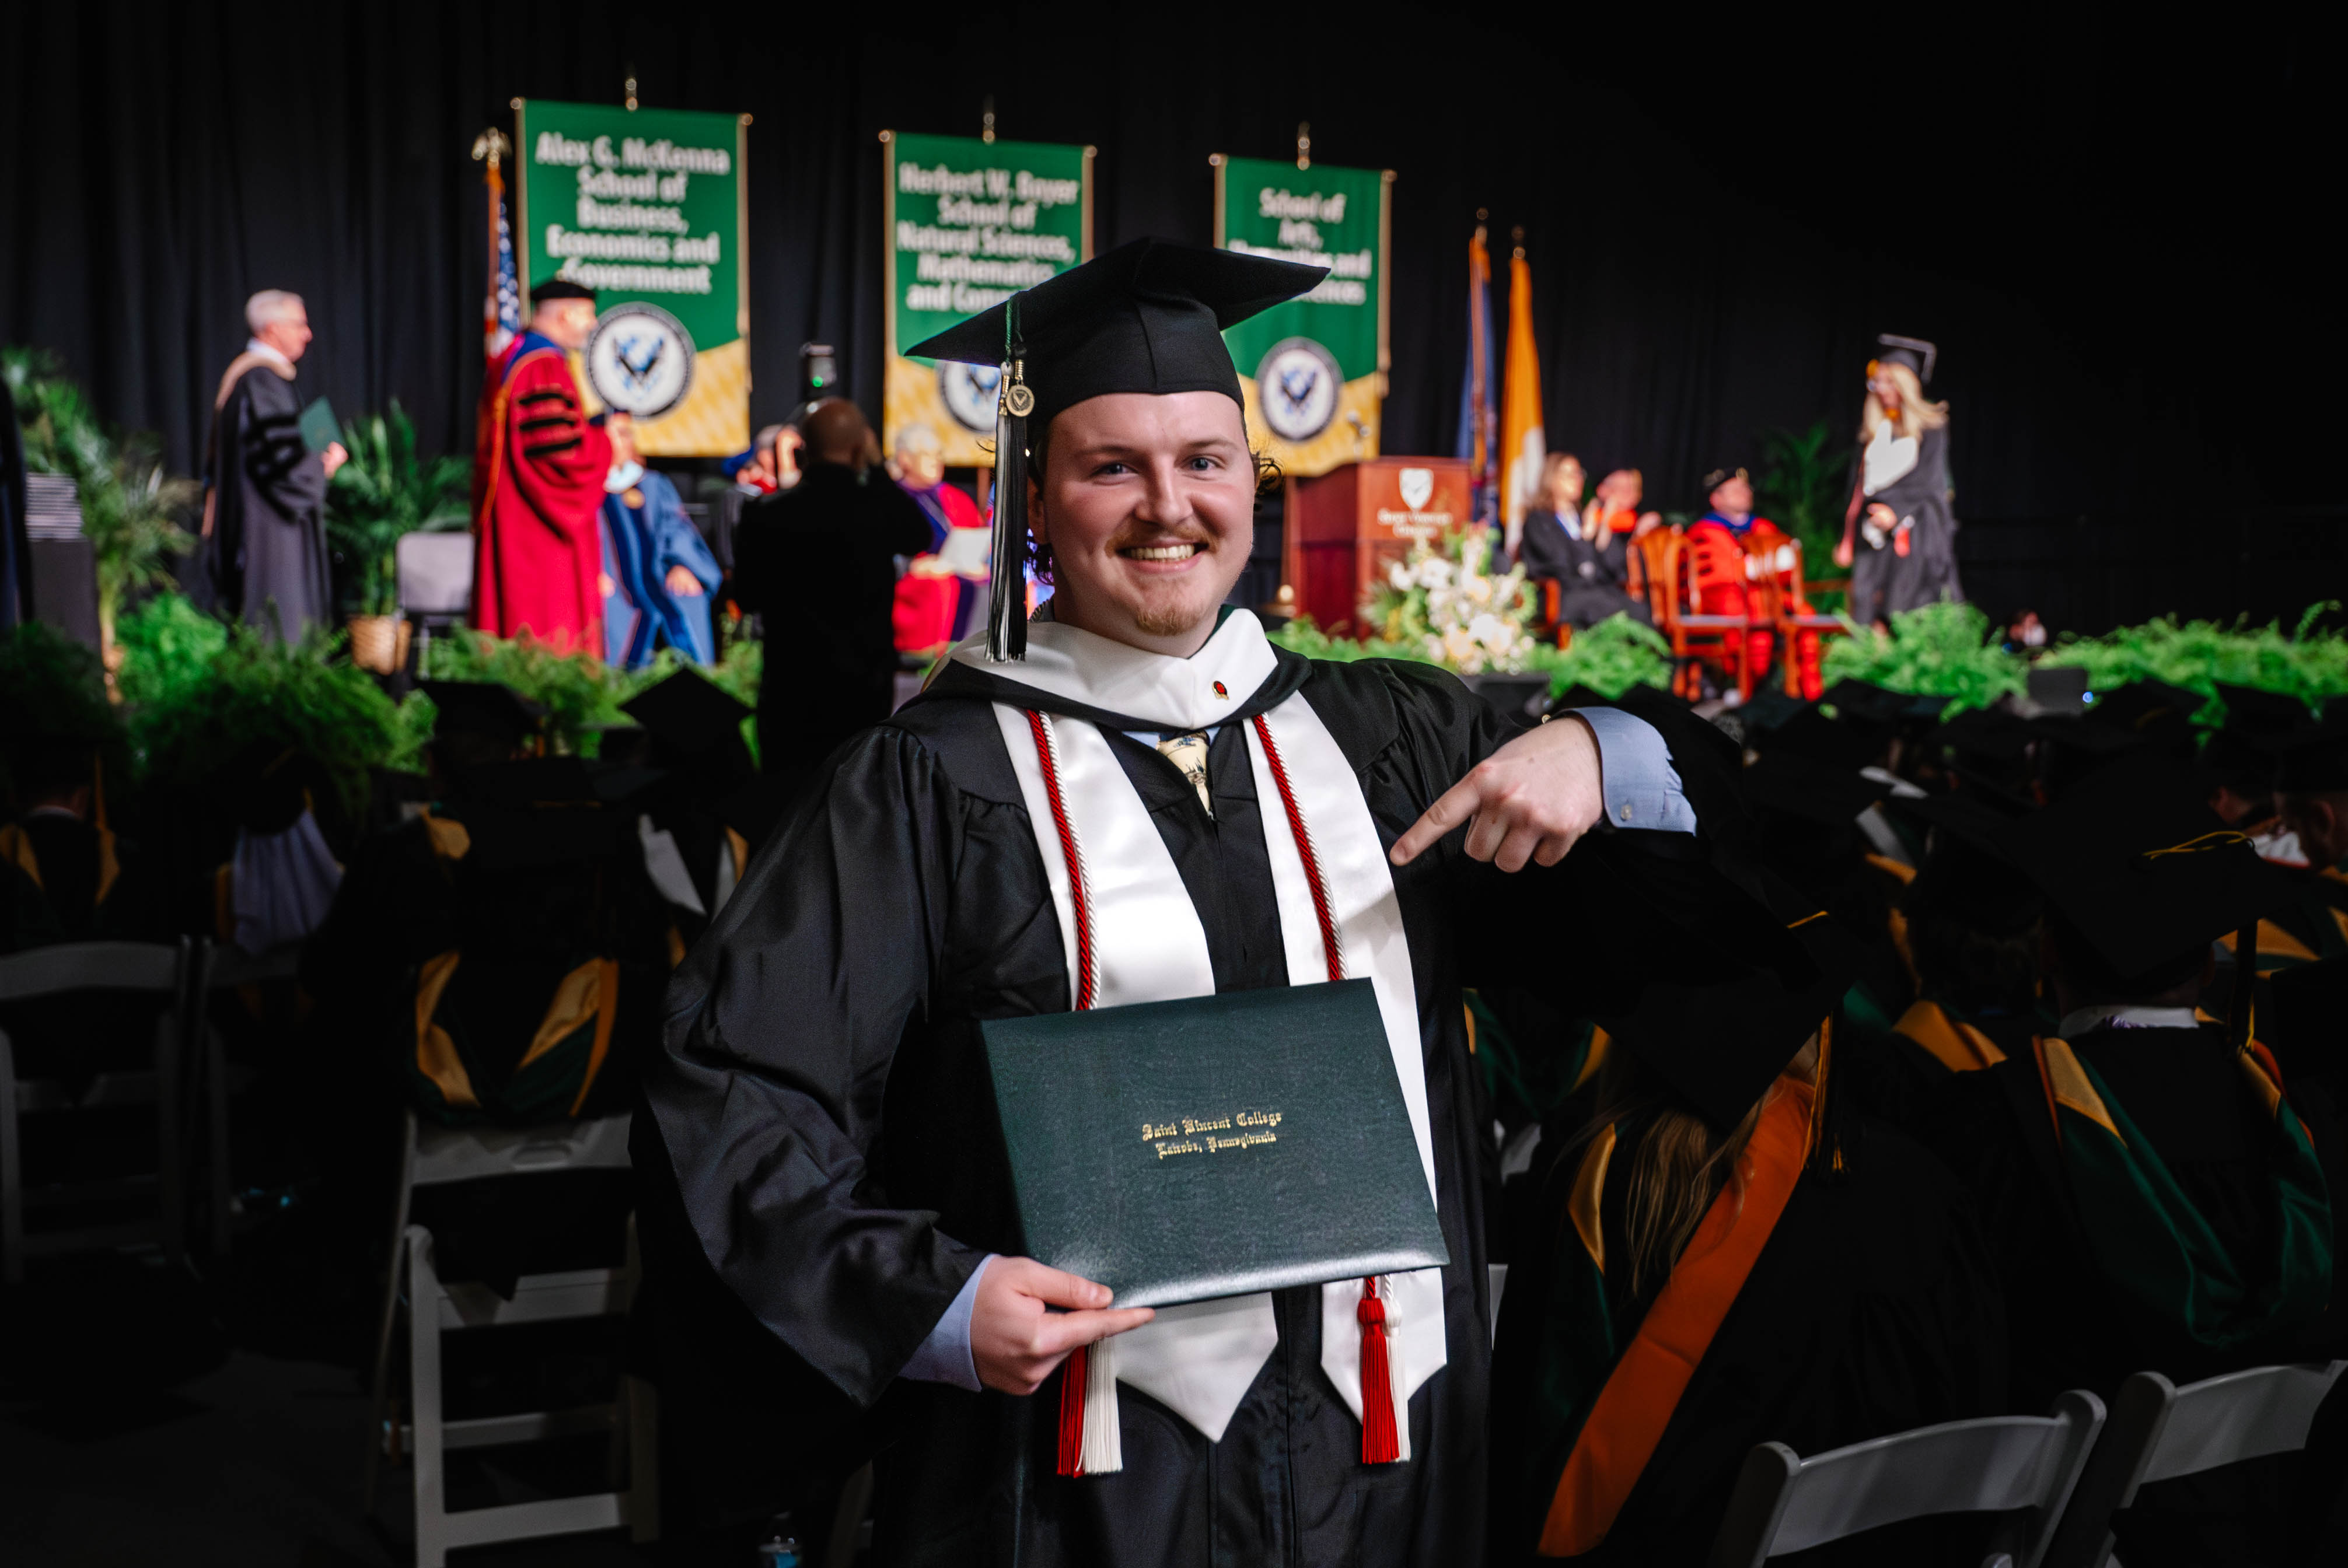 Kieran Rapp, of Pittsburgh, holds his Bachelor of Arts in Digital Art and Media degree